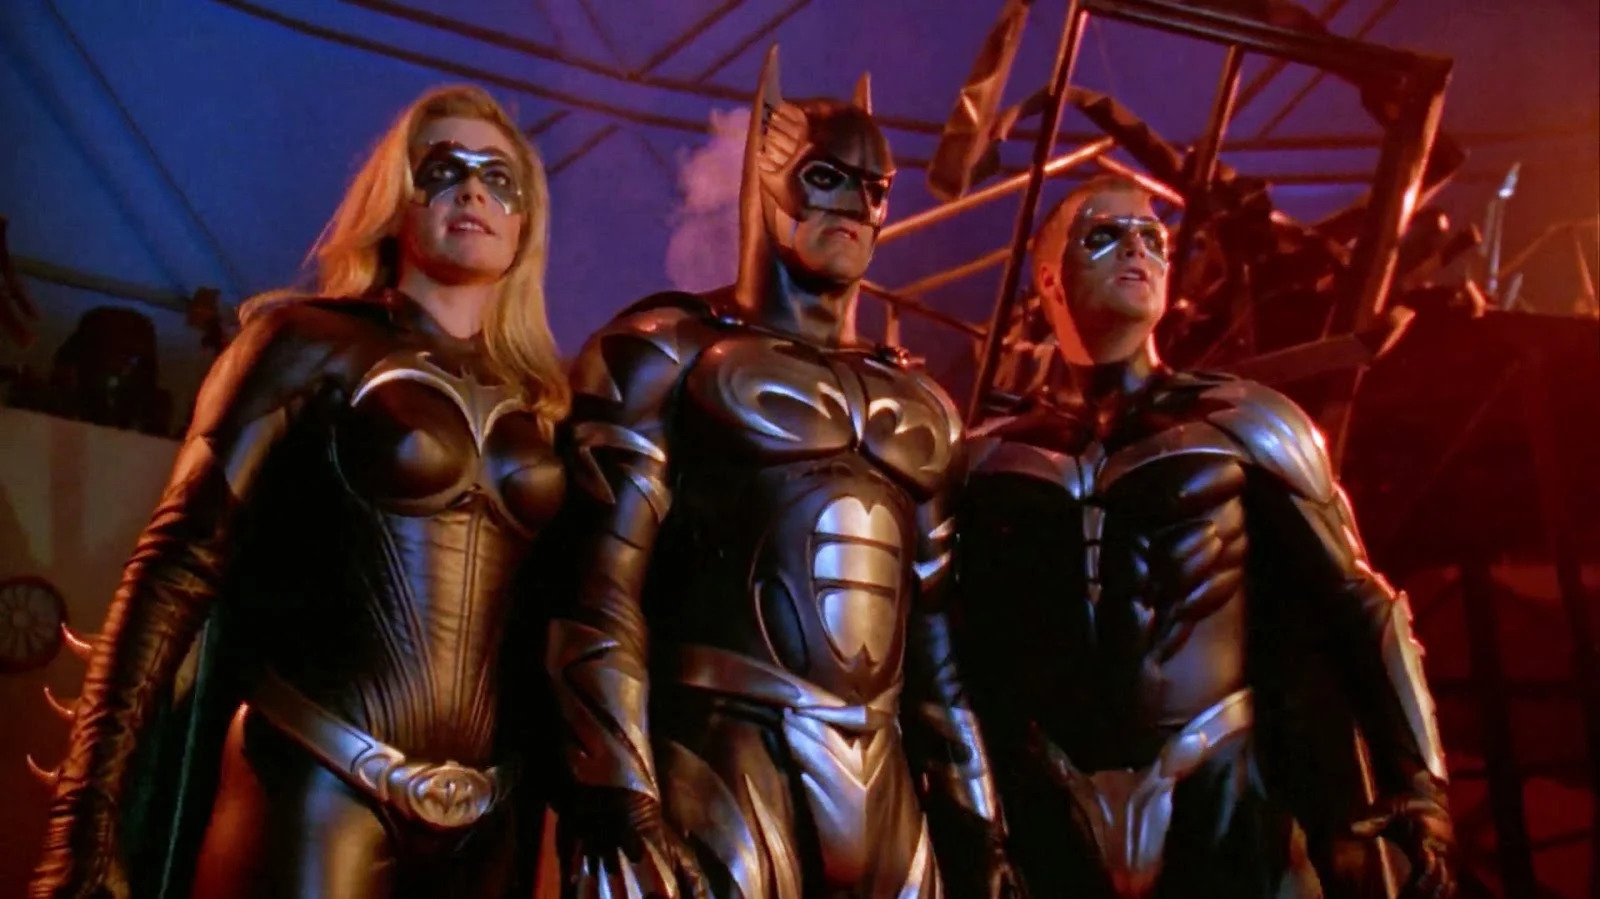 Batman & Robin's Lead Characters Were Played By An Army Of Lookalike Actors